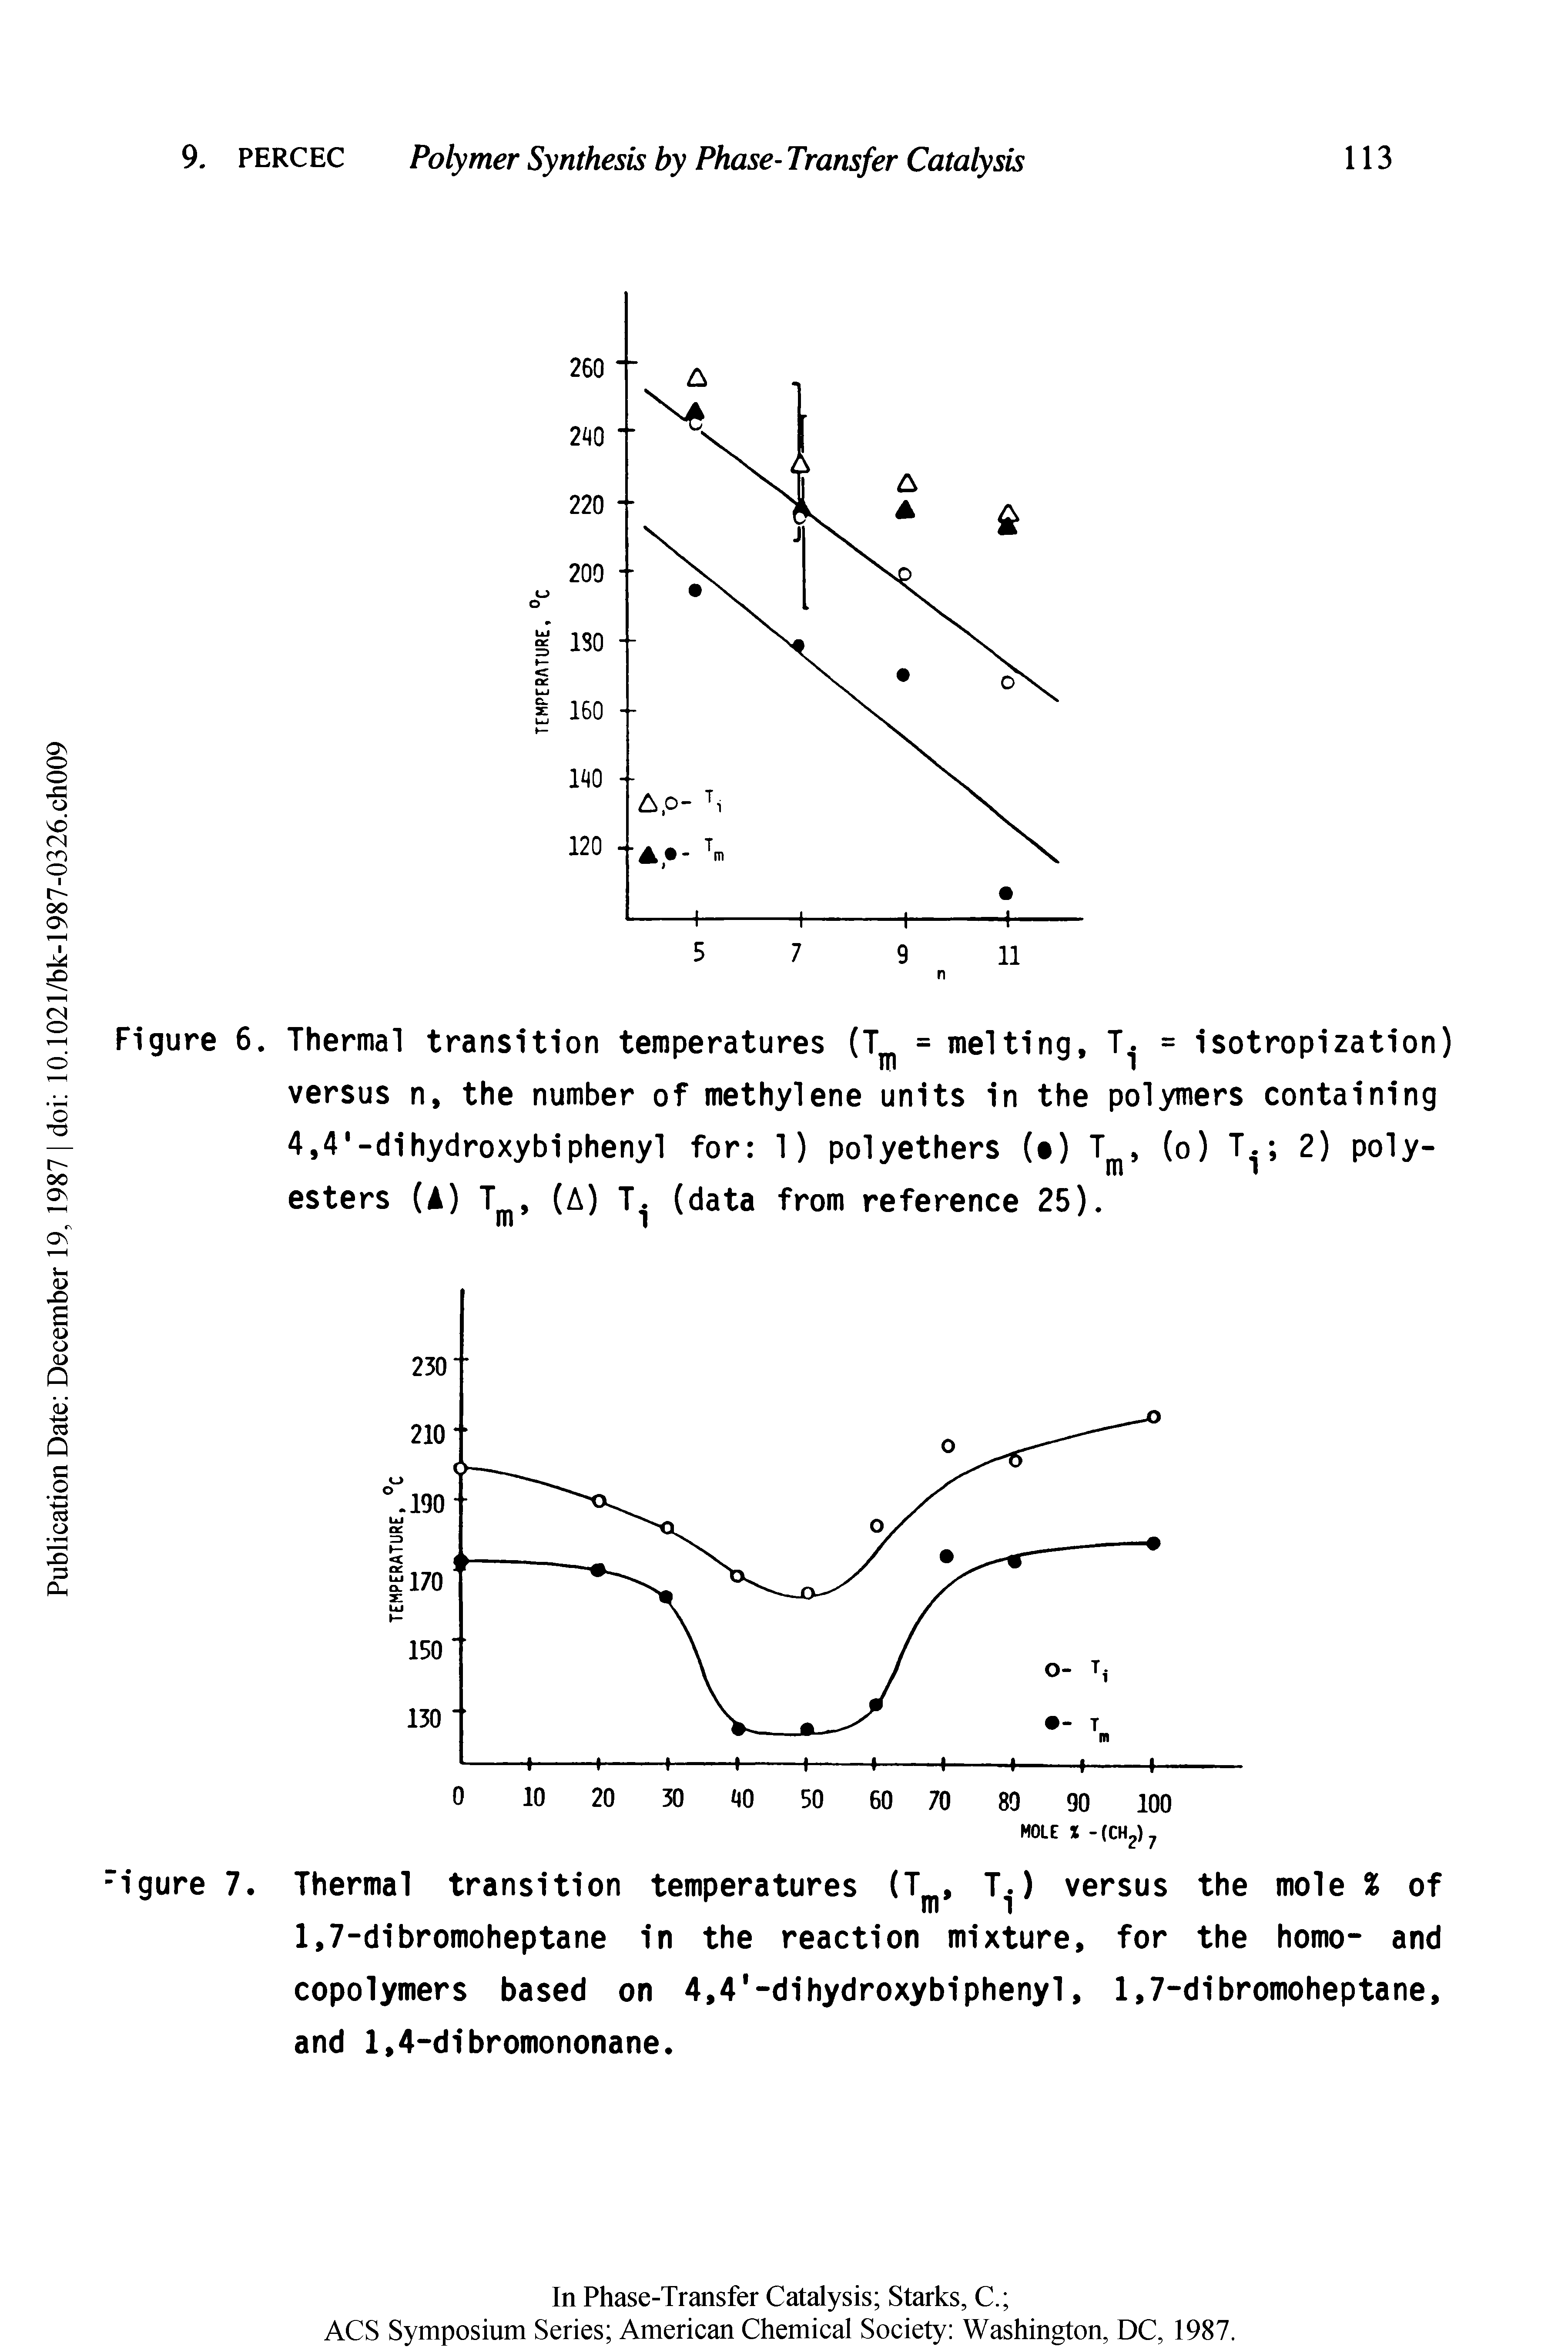 Figure 6. Thermal transition temperatures (T = melting, = isotropization) versus n, the number of methylene units in the polymers containing 4,4 -dihydroxybiphenyl for 1) polyethers ( ) esters (A) T, (A) T. (data from reference 25).